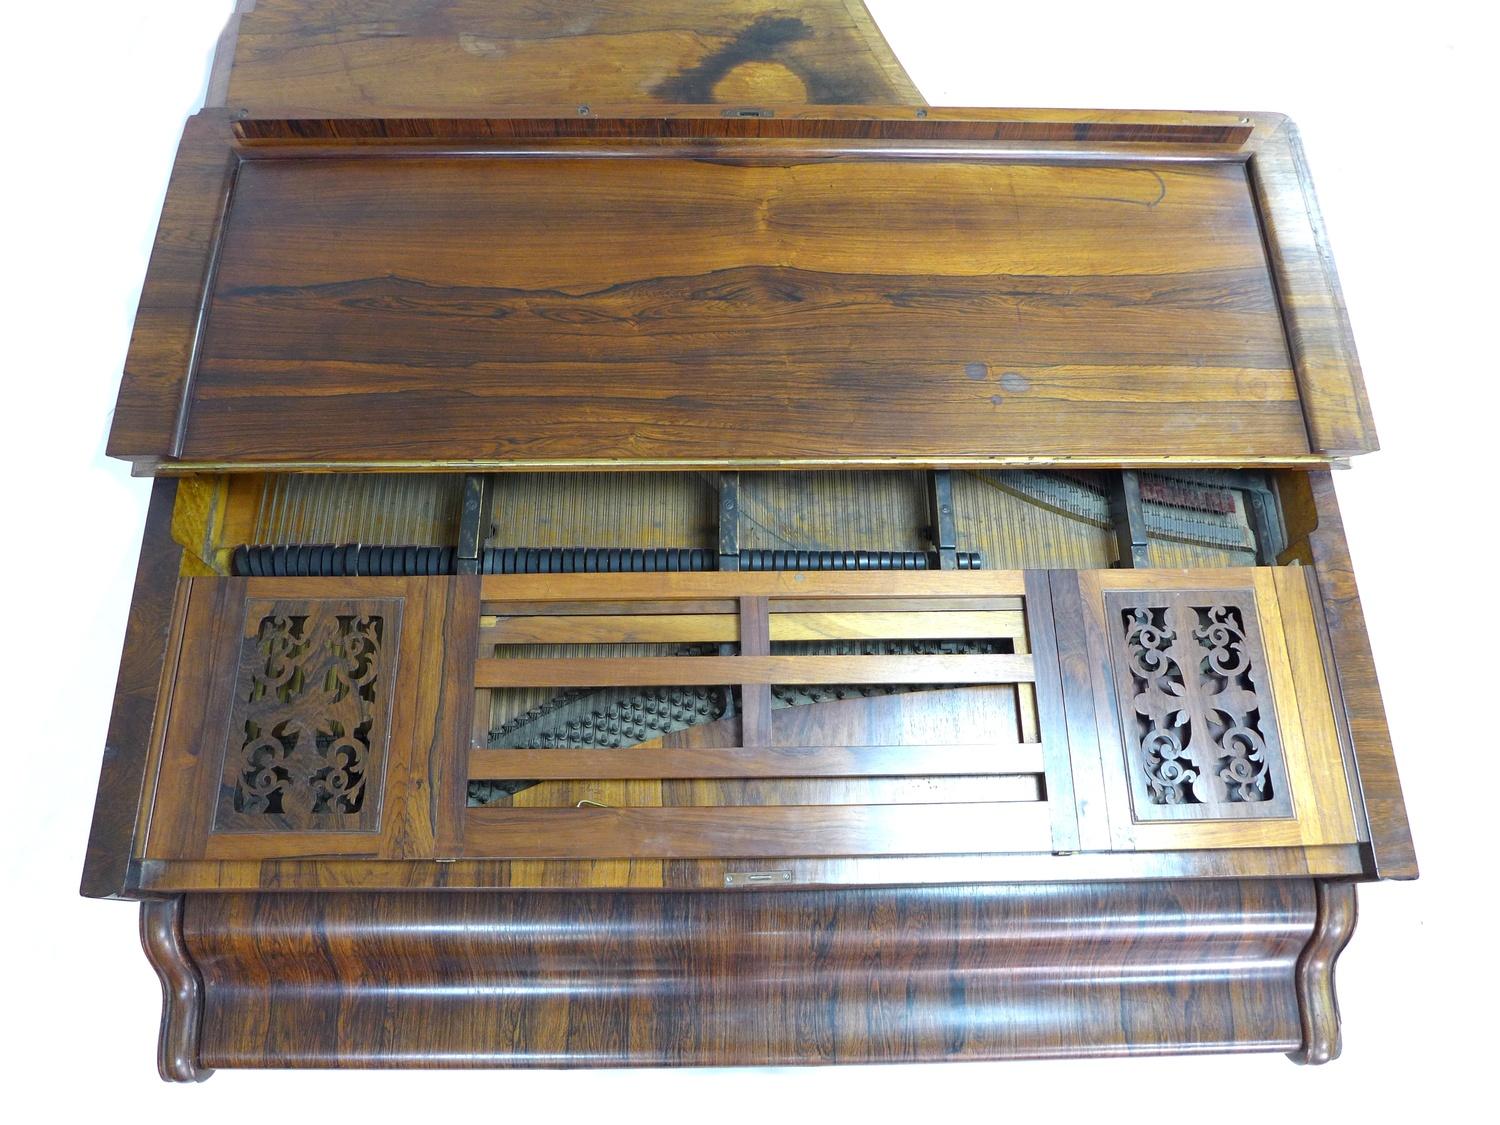 A Victorian Kirkman parlour grand piano, circa 1870, with rosewood veneered case, wooden frame and - Image 13 of 19